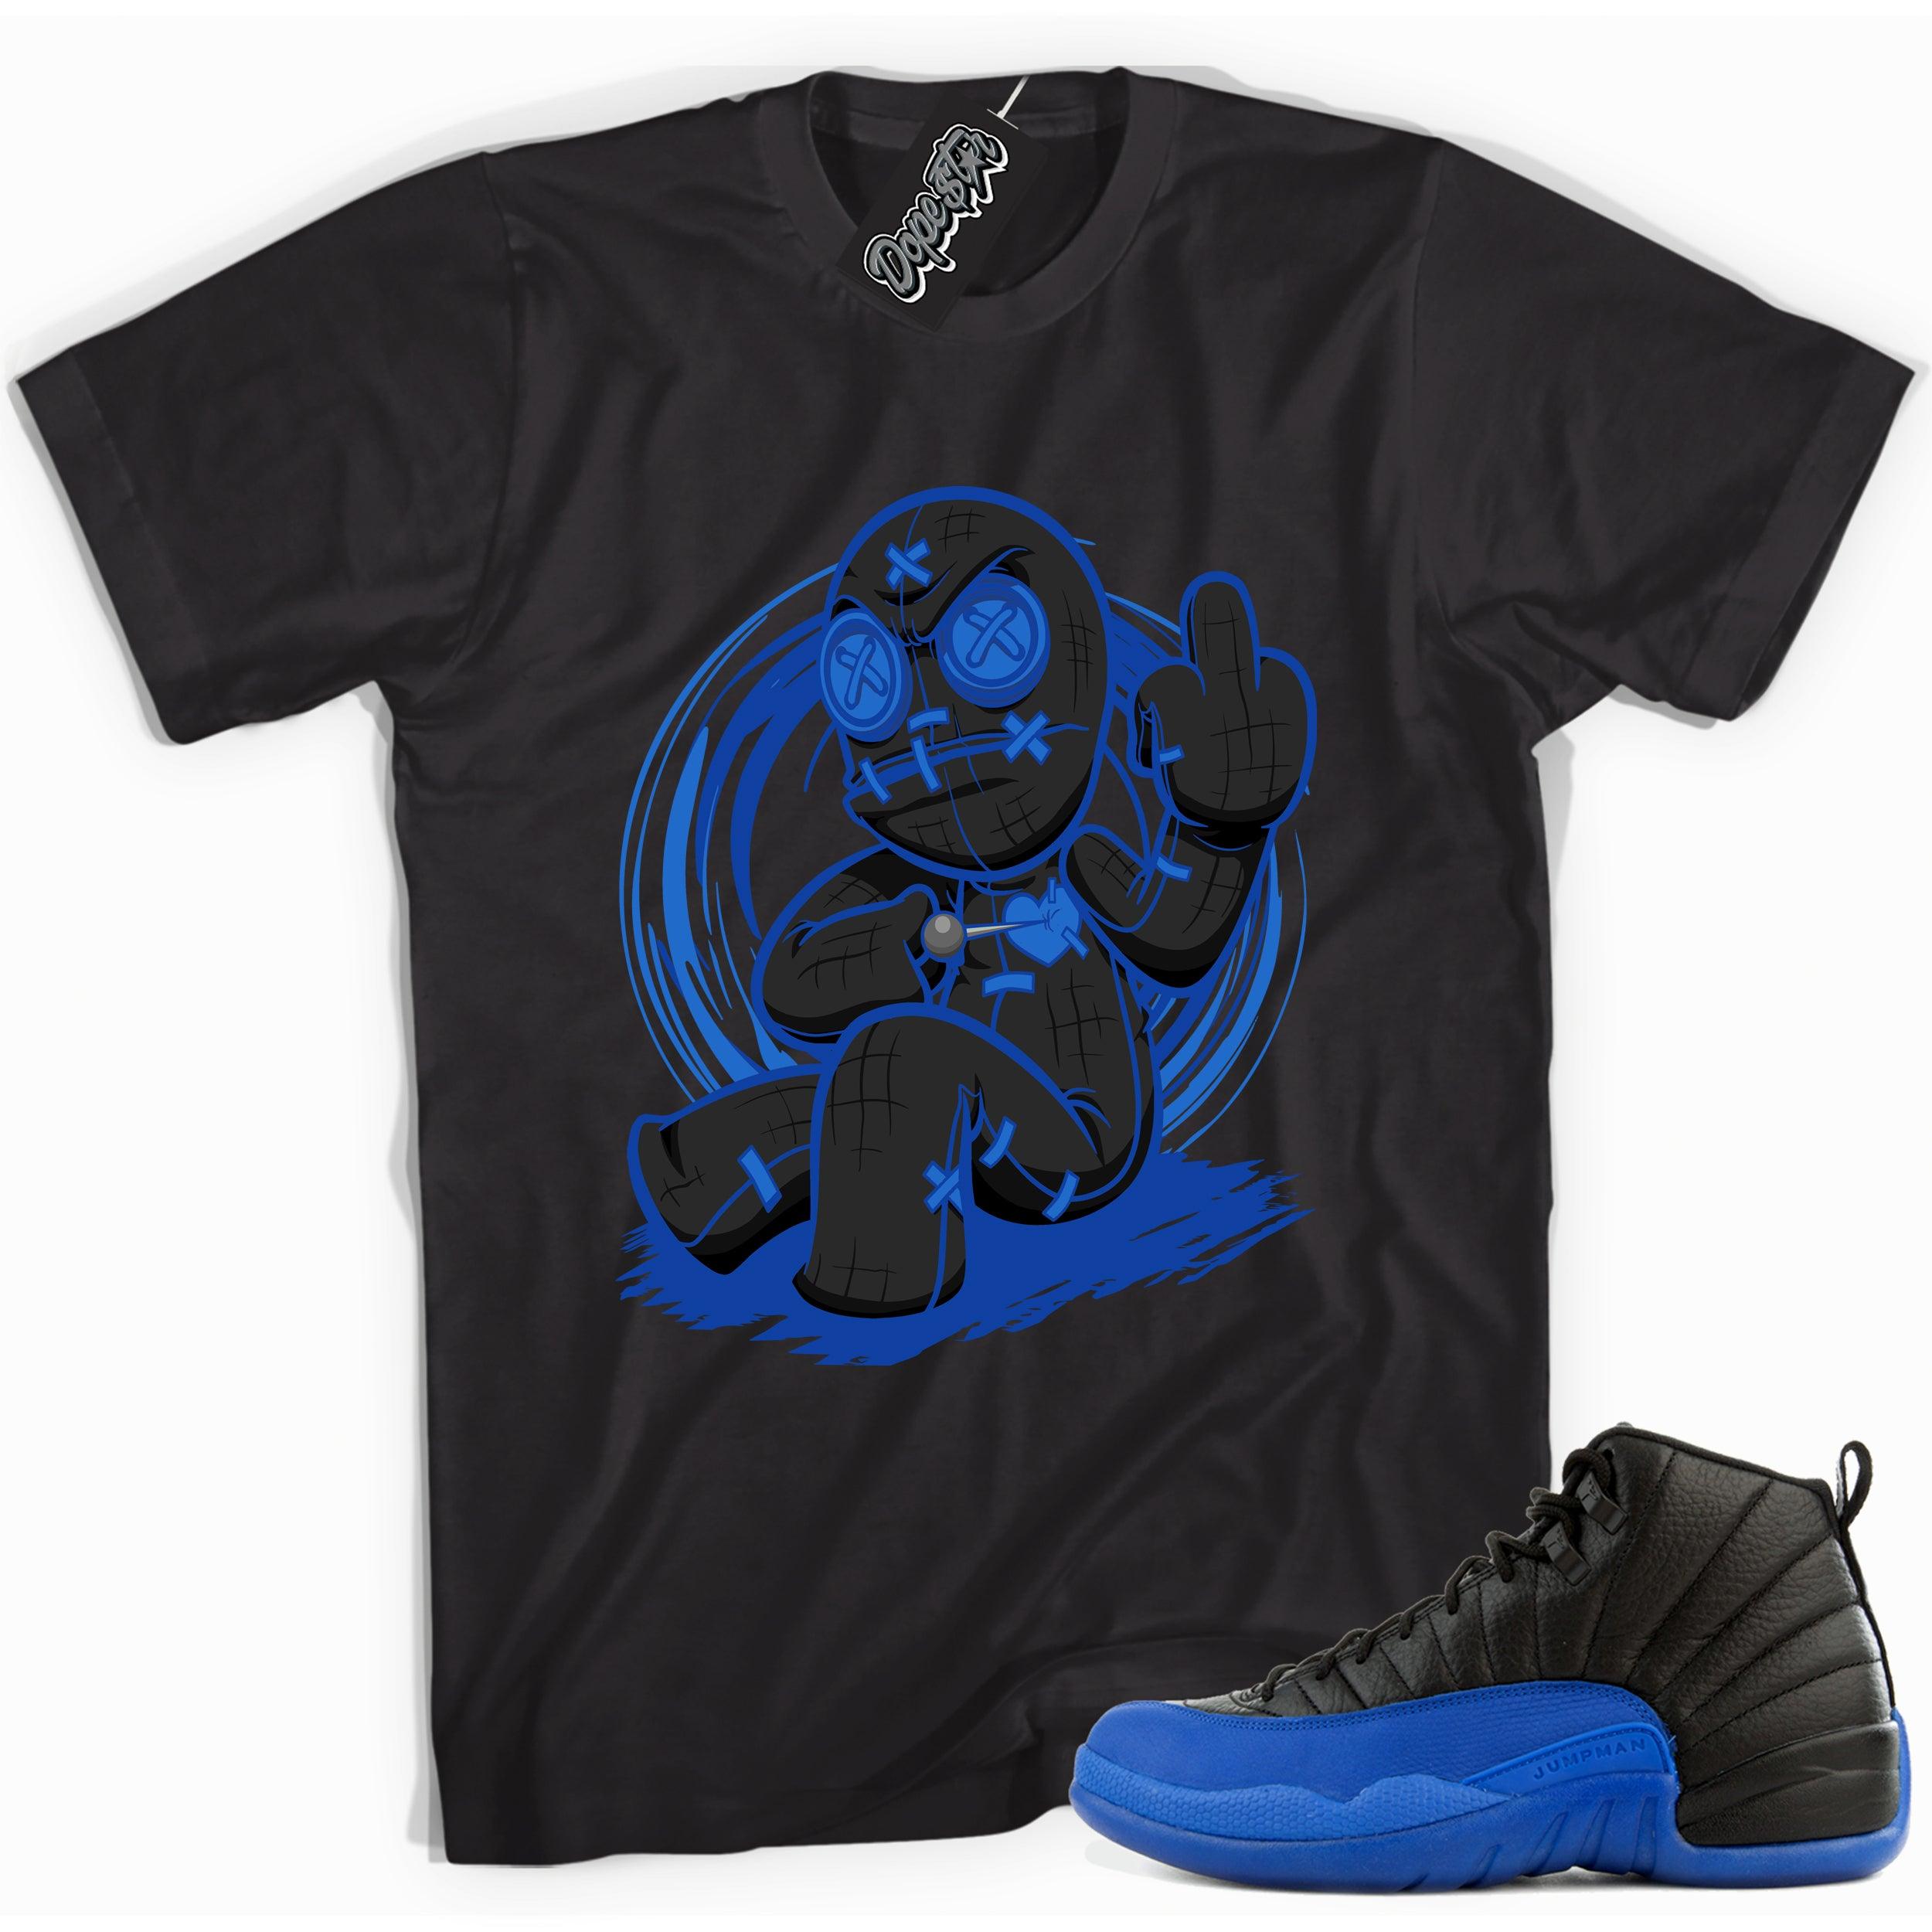 Cool black graphic tee with 'voodoo' print, that perfectly matches  Air Jordan 12 Retro Black Game Royal sneakers.